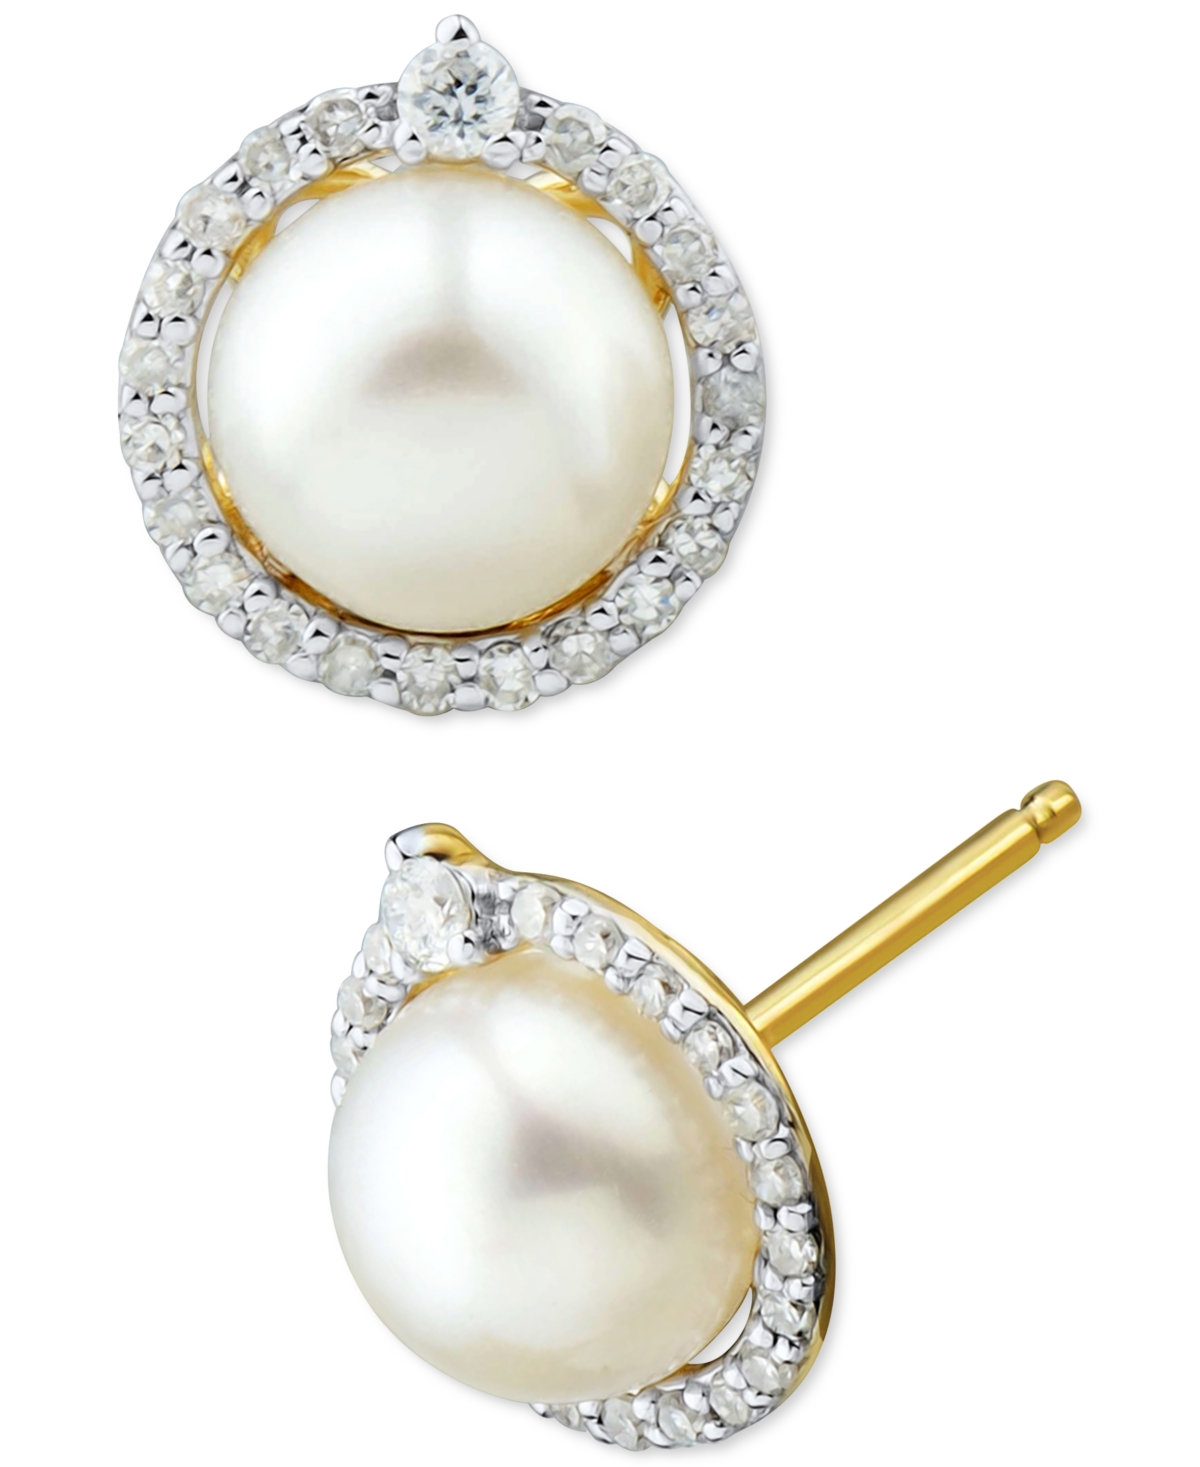 Cultured Freshwater Pearl (6mm) & Diamond (1/6 ct. t.w.) Halo Stud Earrings in 14k White Gold - Gold